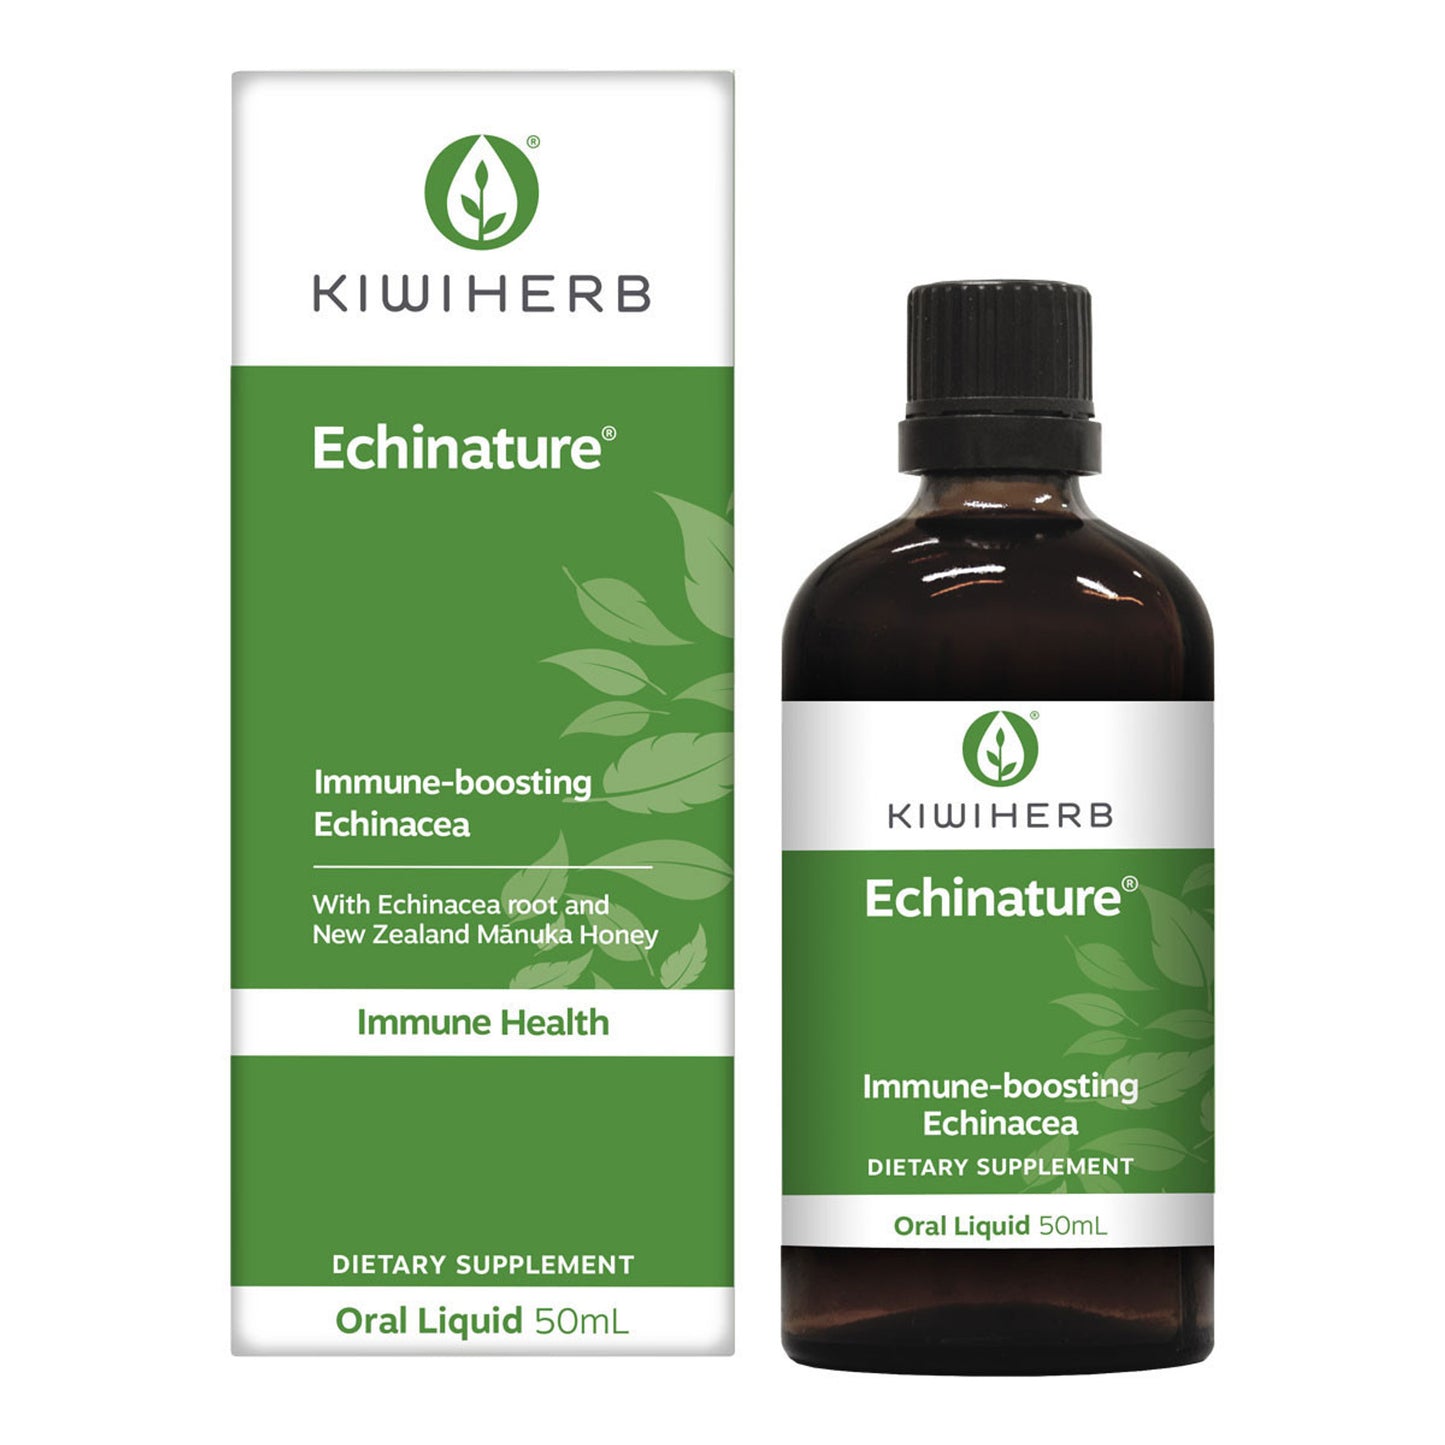 Kiwiherb Echinacea bottle and packaging with white background. 